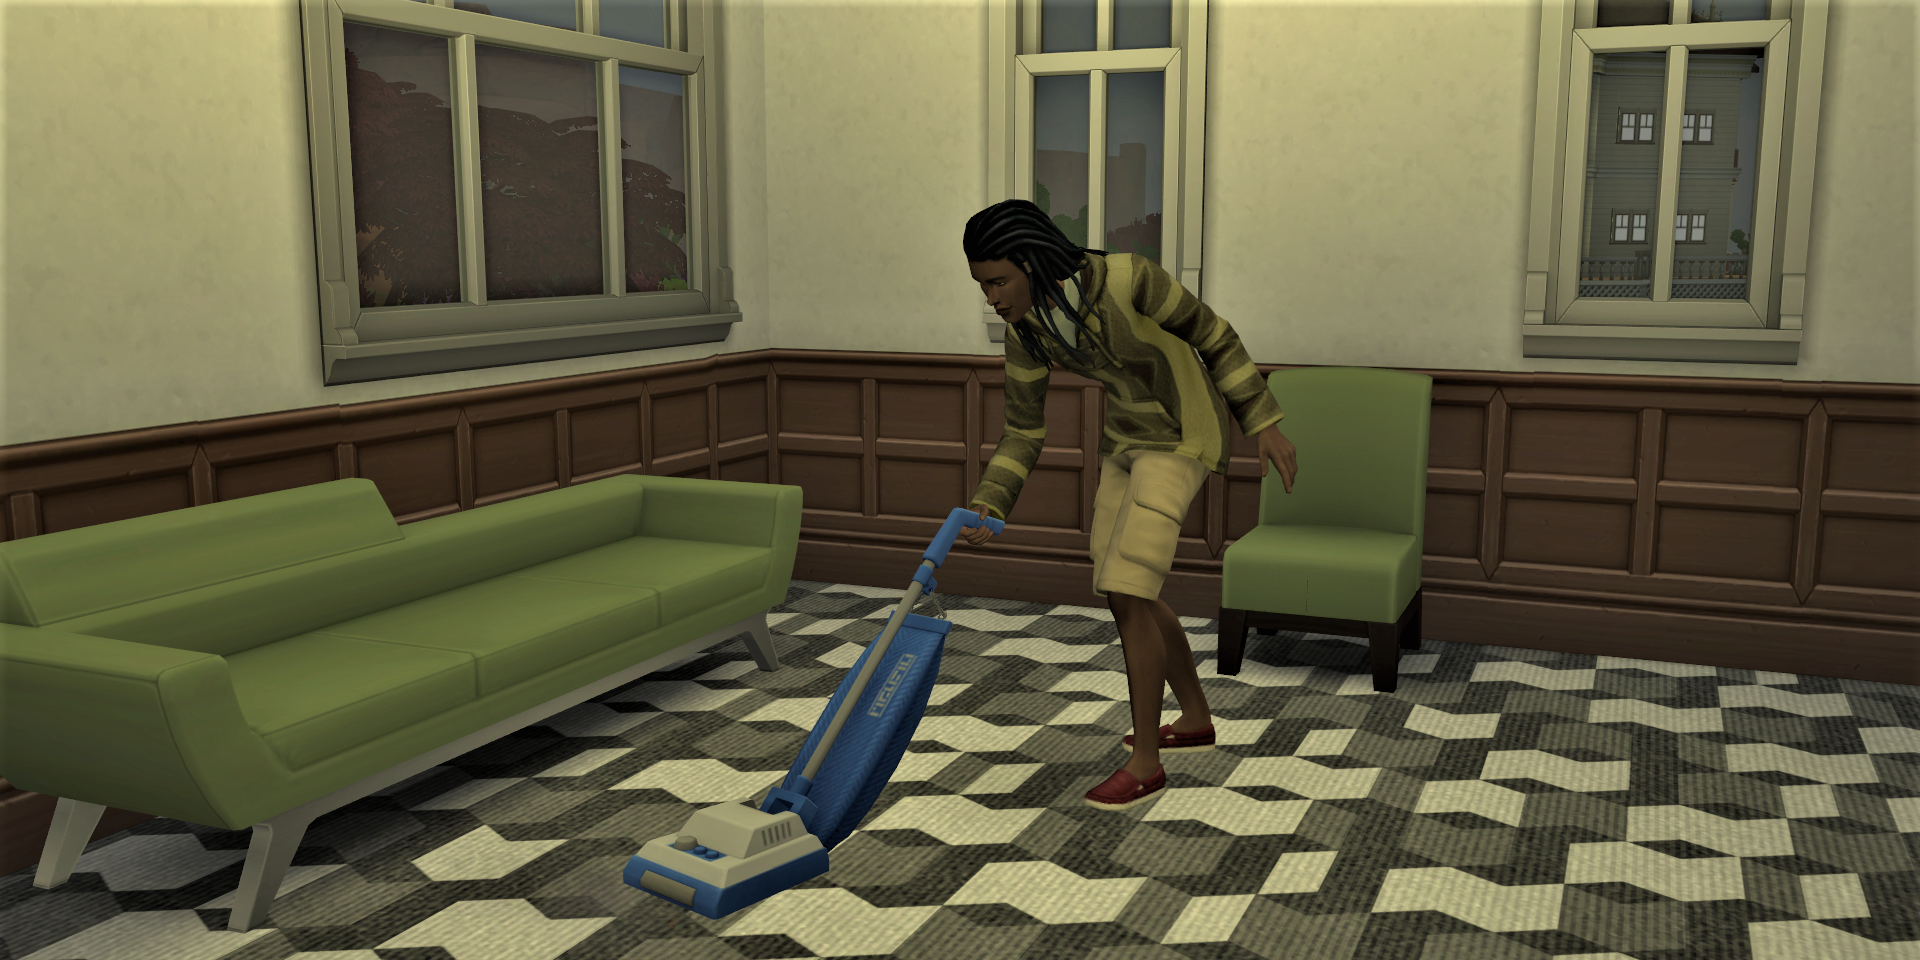 The Eclectic Arts household uses a vacuum from The Sims 4's Bust the Dust kit